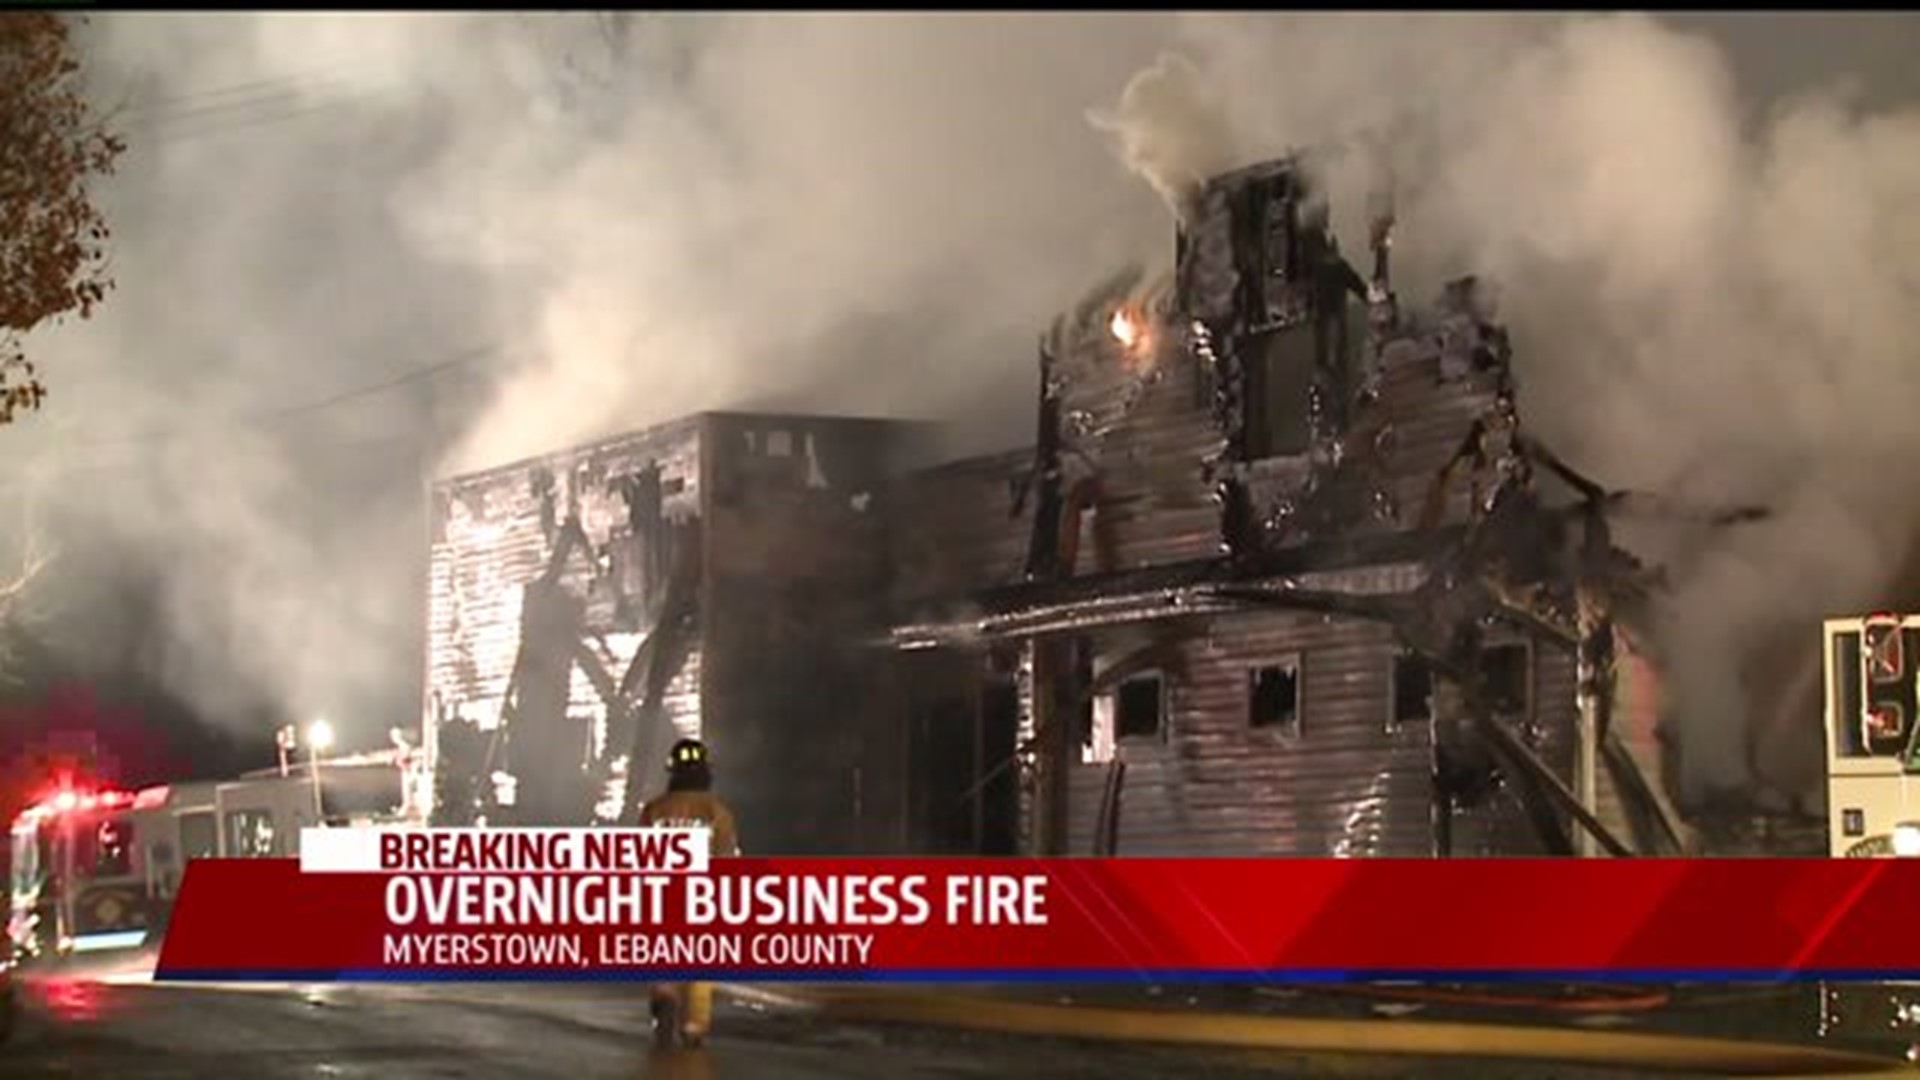 Fire rips through business in Lebanon County